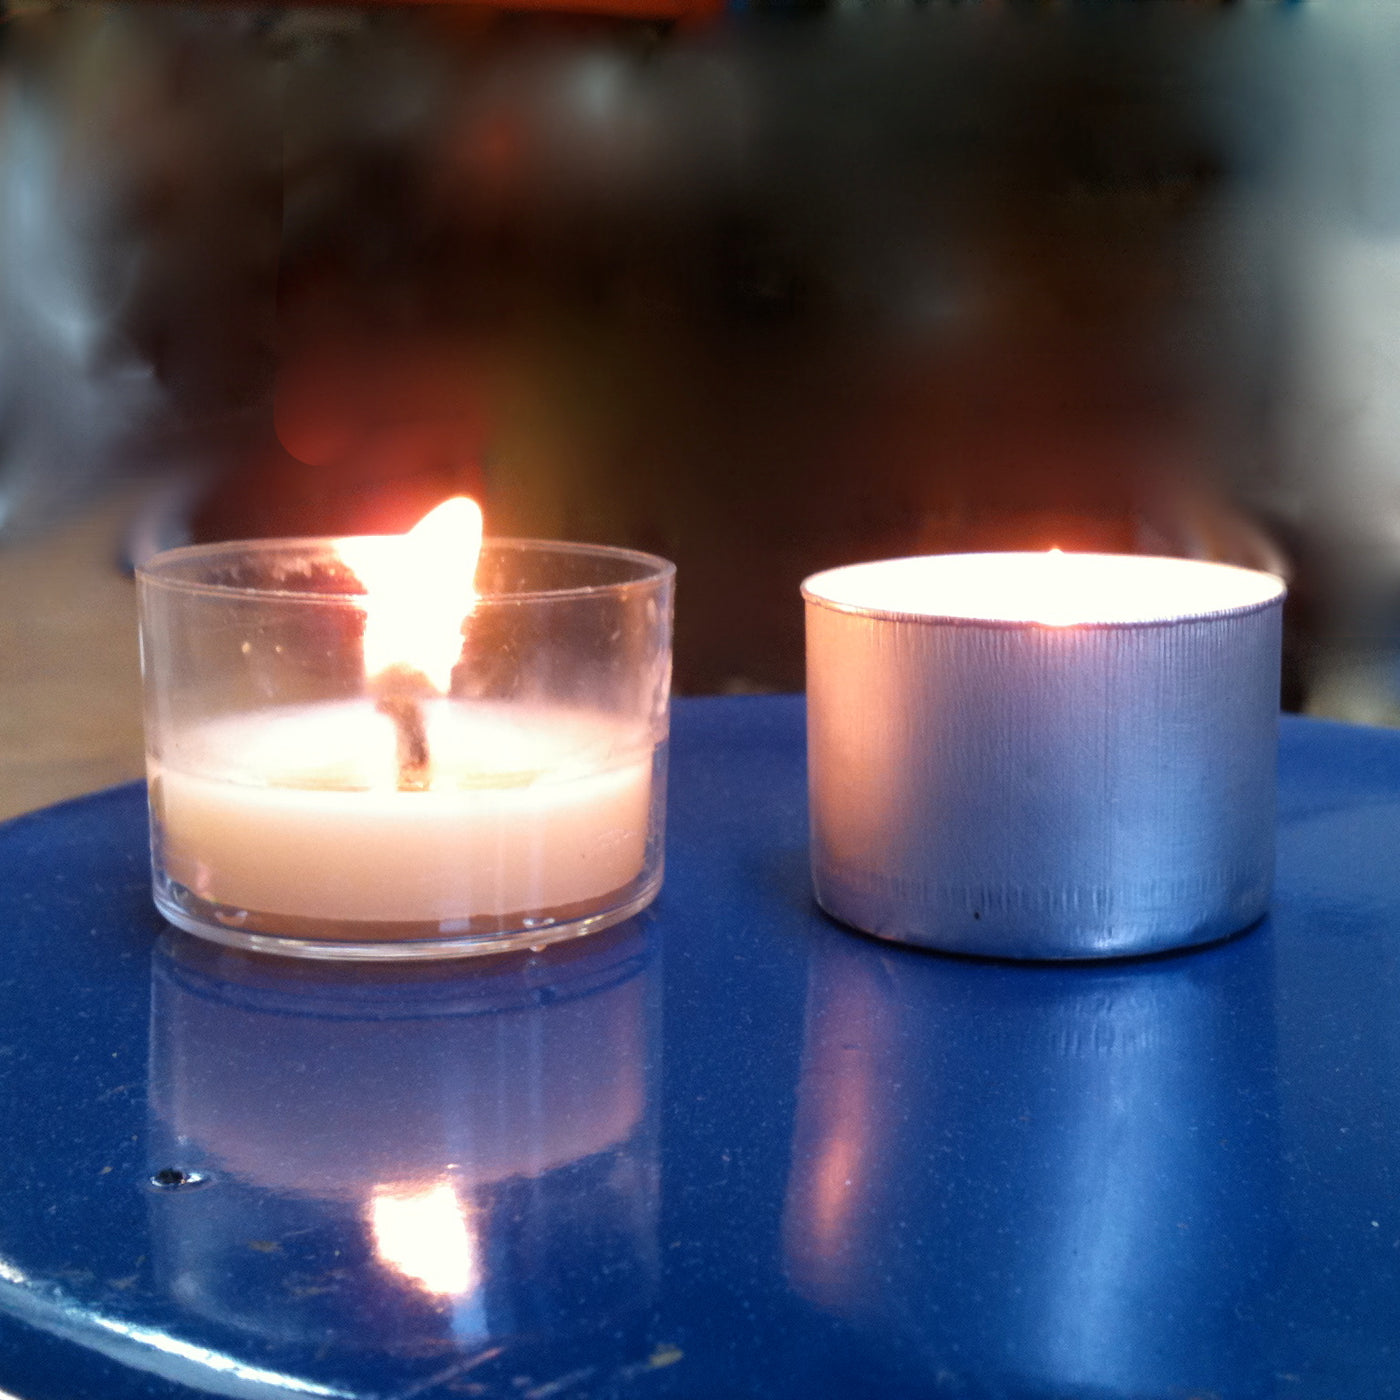 A tip for cleaning your tealight cups to reuse them